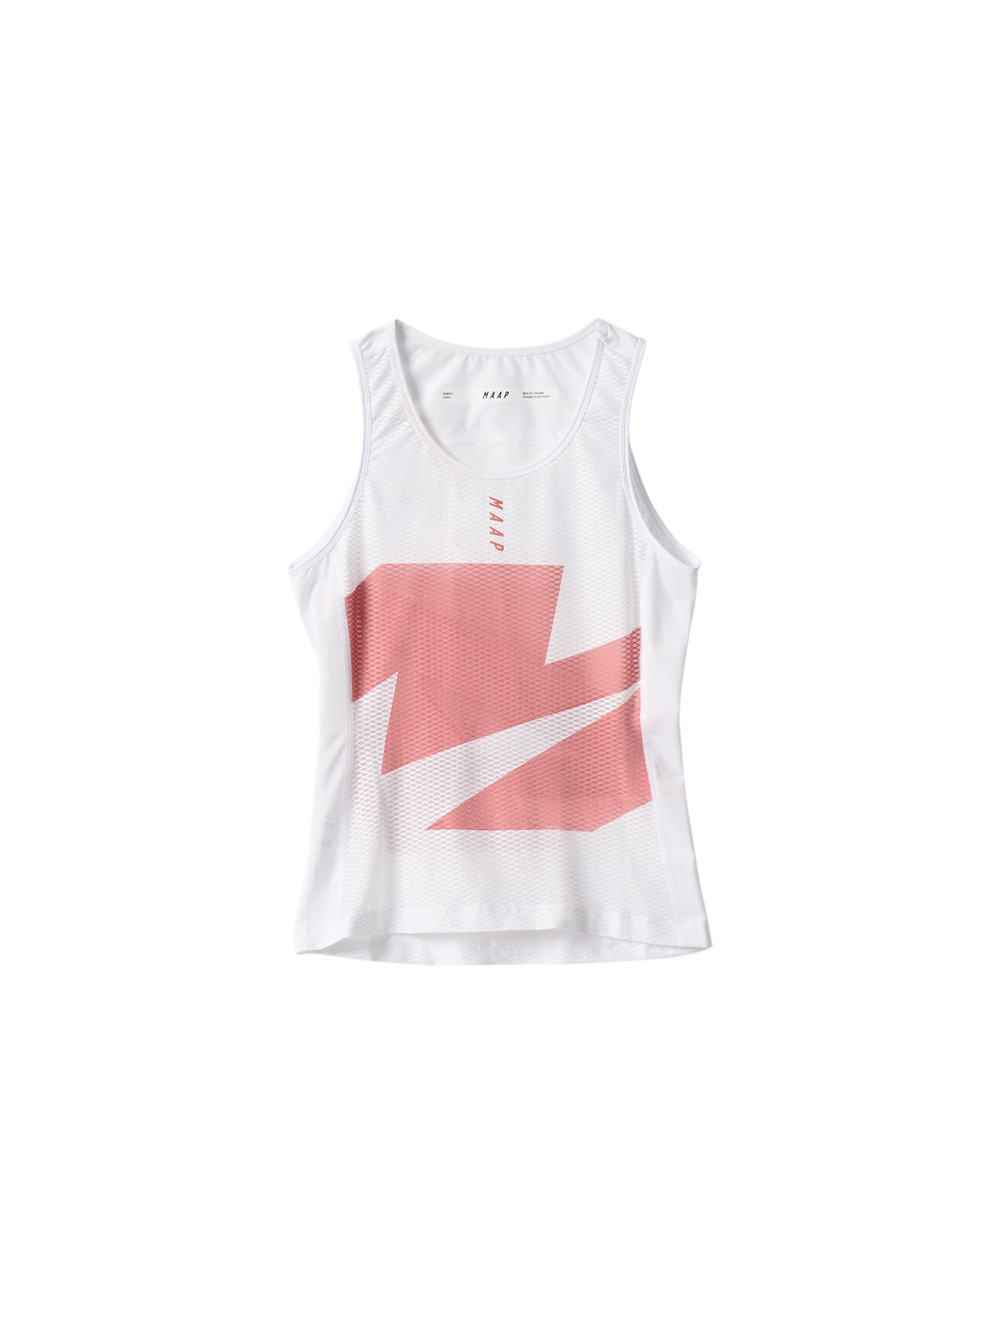 Product Image for Women's Evolve Team Base Layer